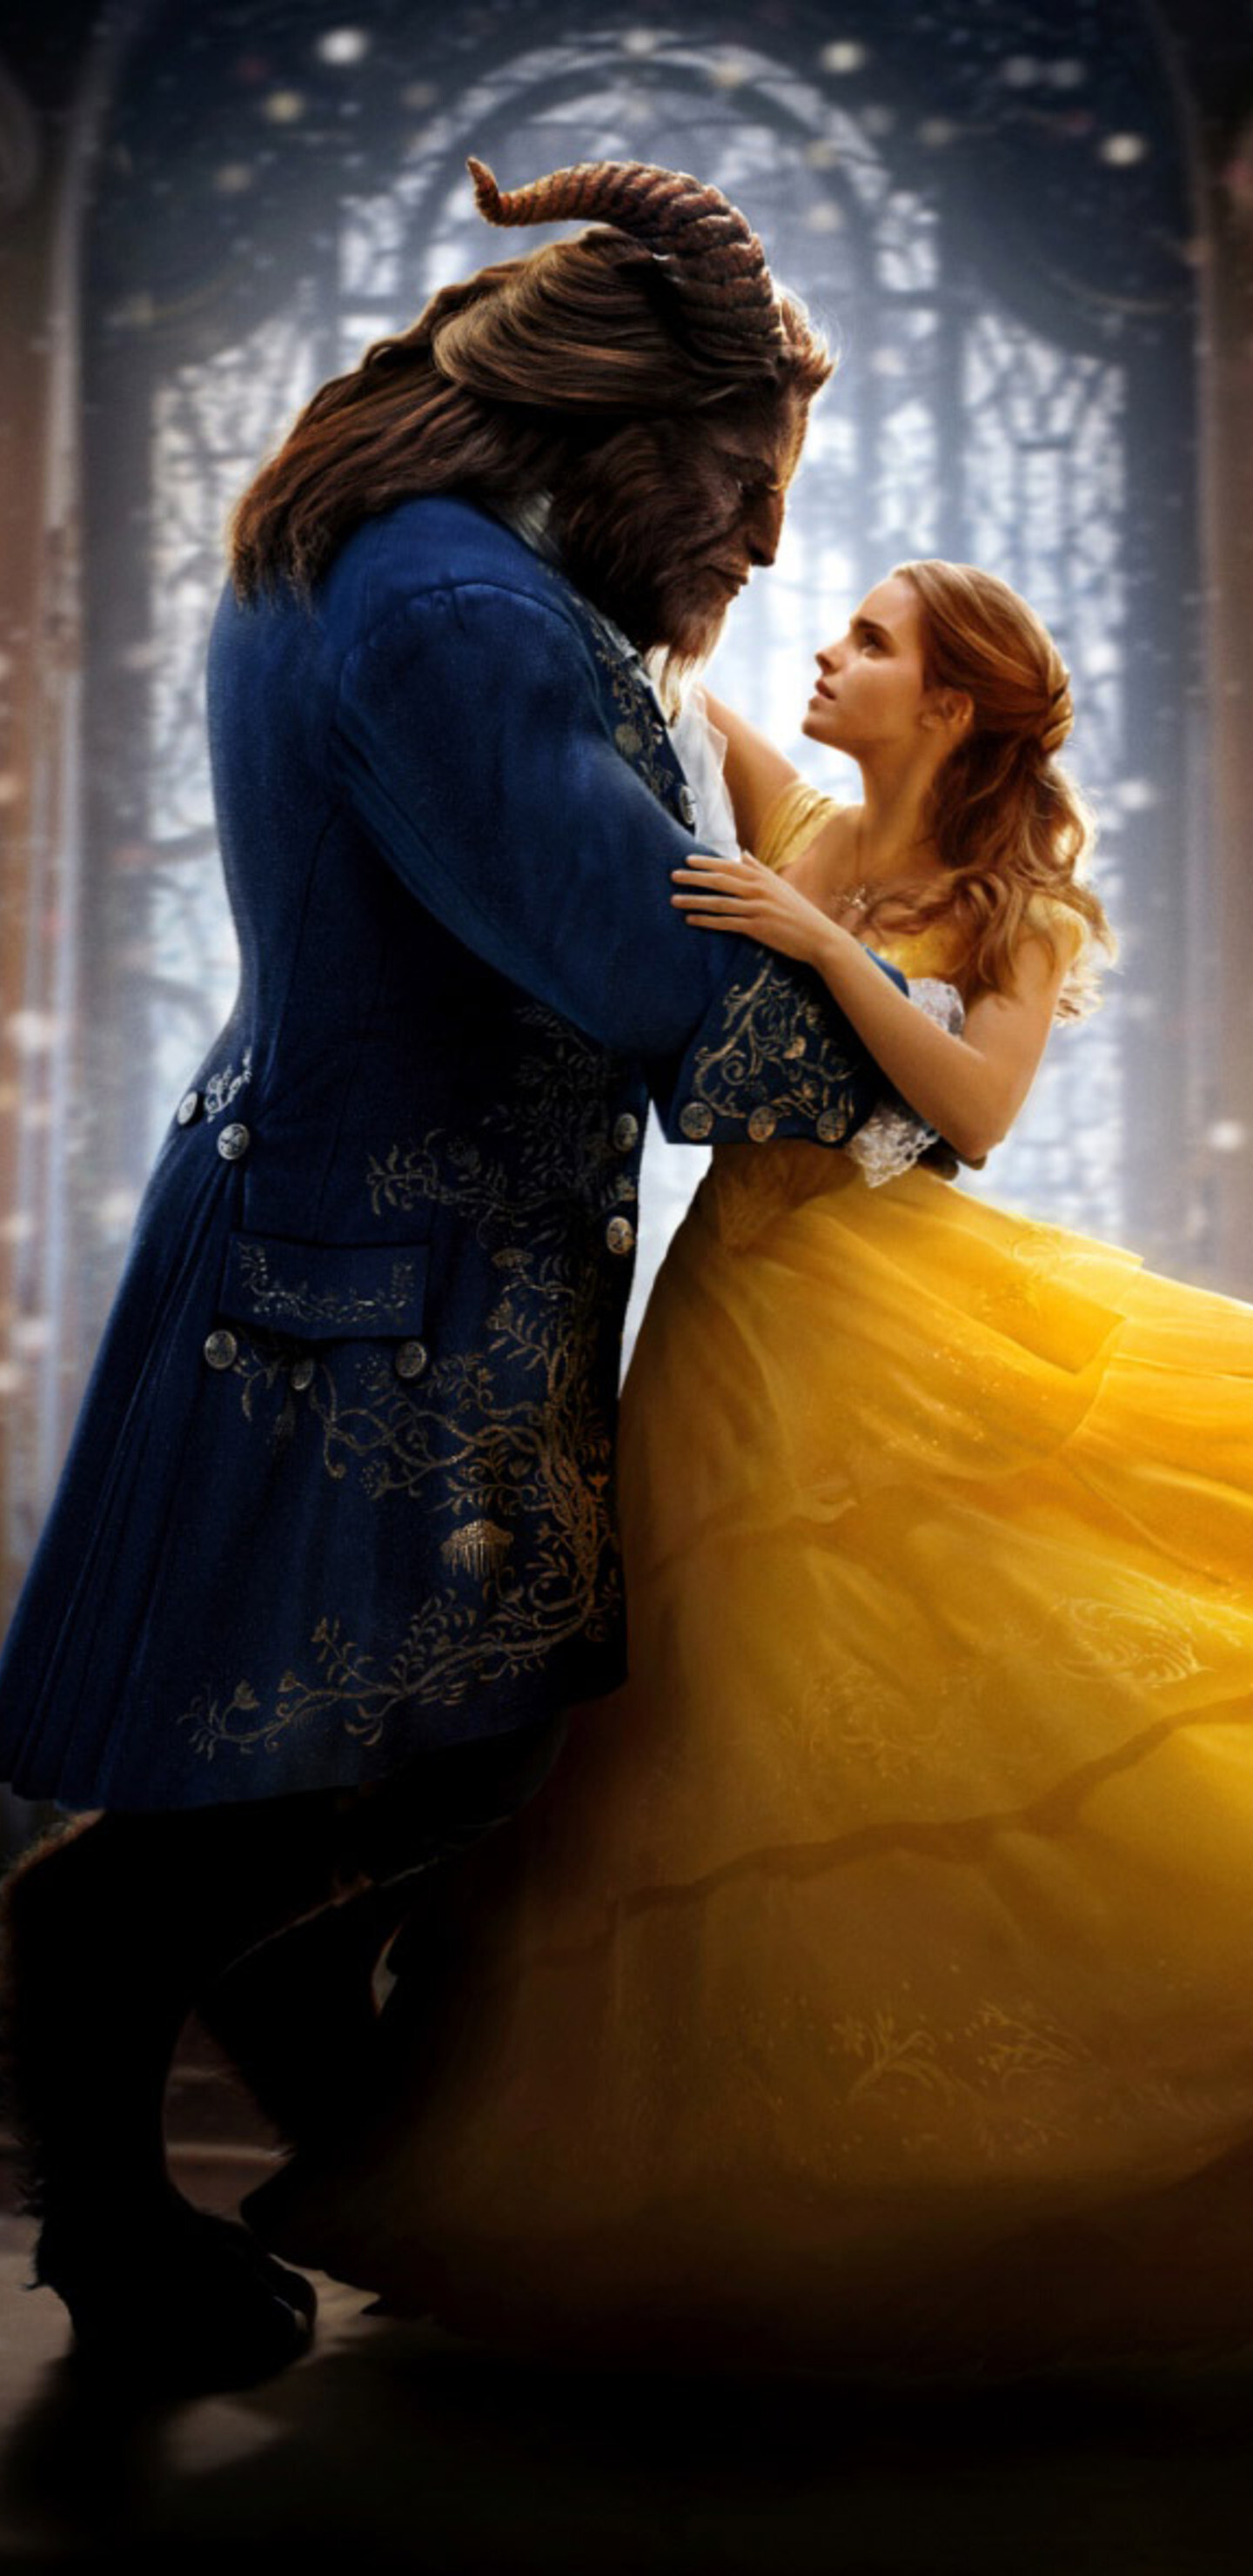 Beauty and the Beast: A selfish Prince is cursed to become a monster for the rest of his life. 1440x2960 HD Wallpaper.